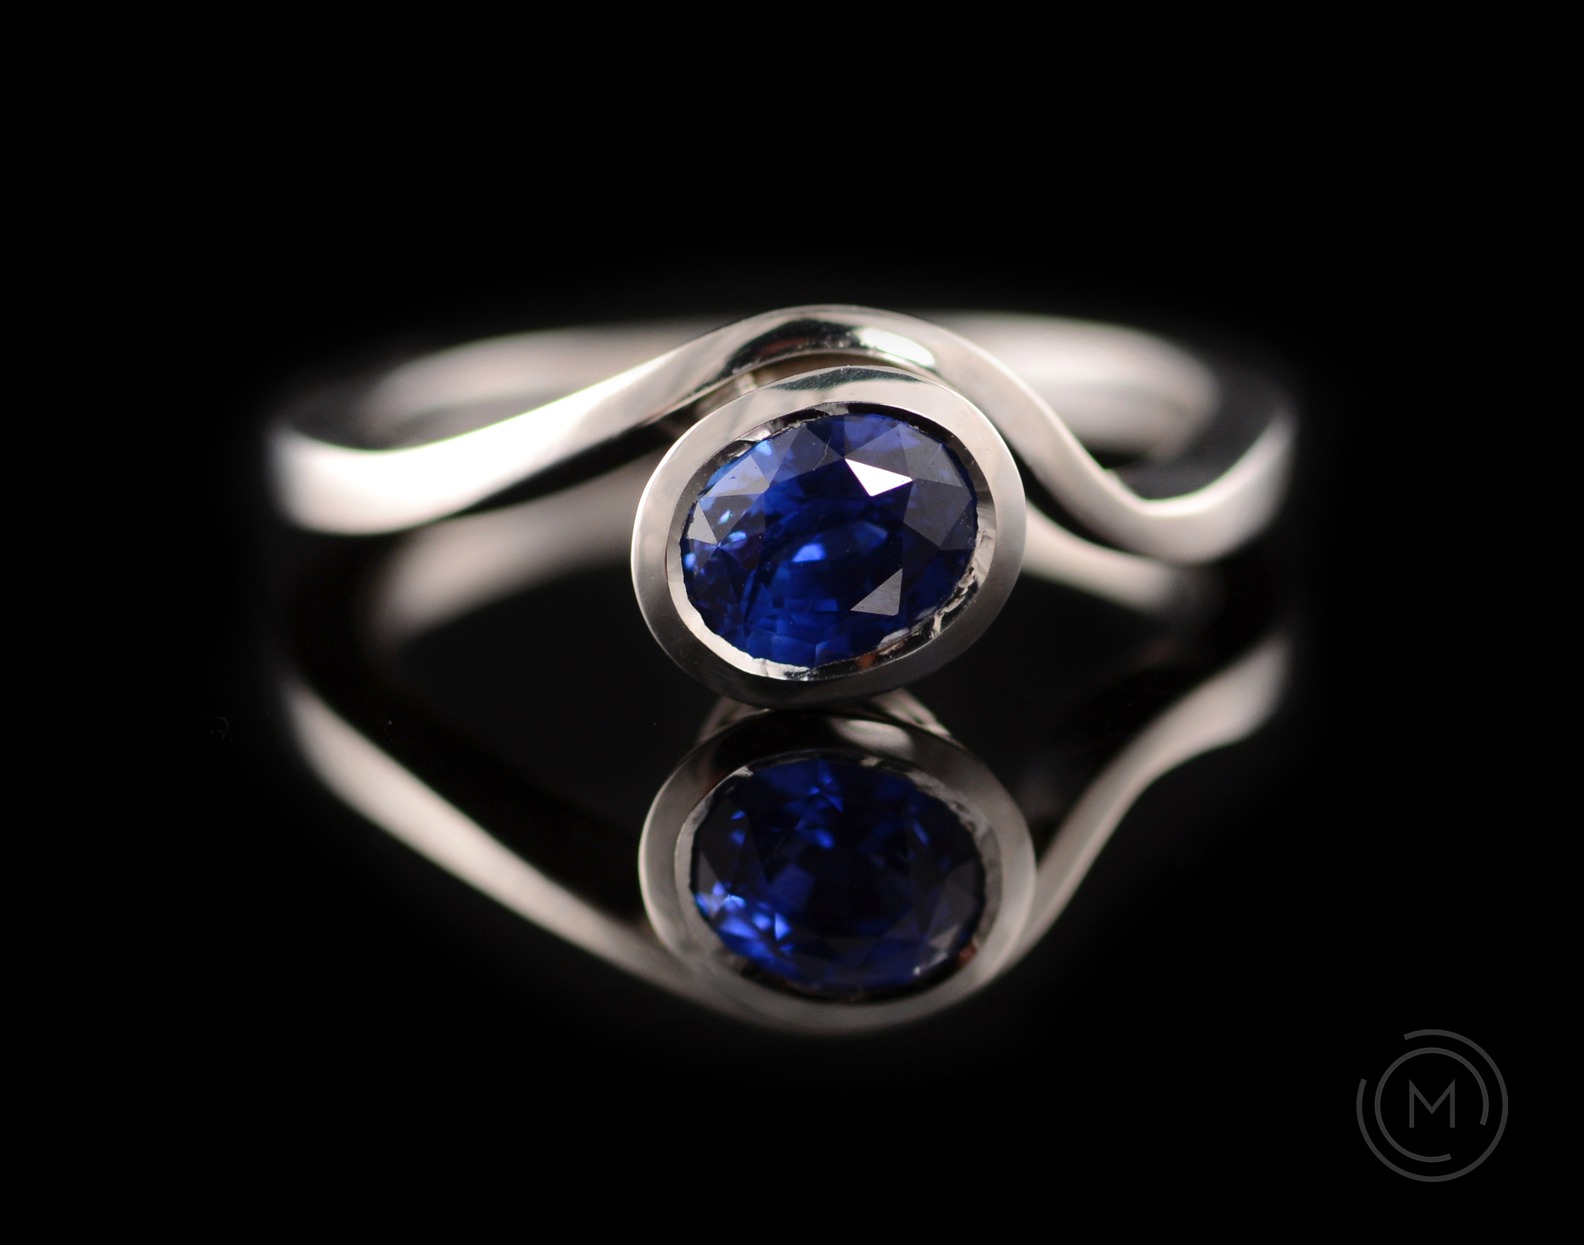 Balance platinum engagement ring with oval blue sapphire